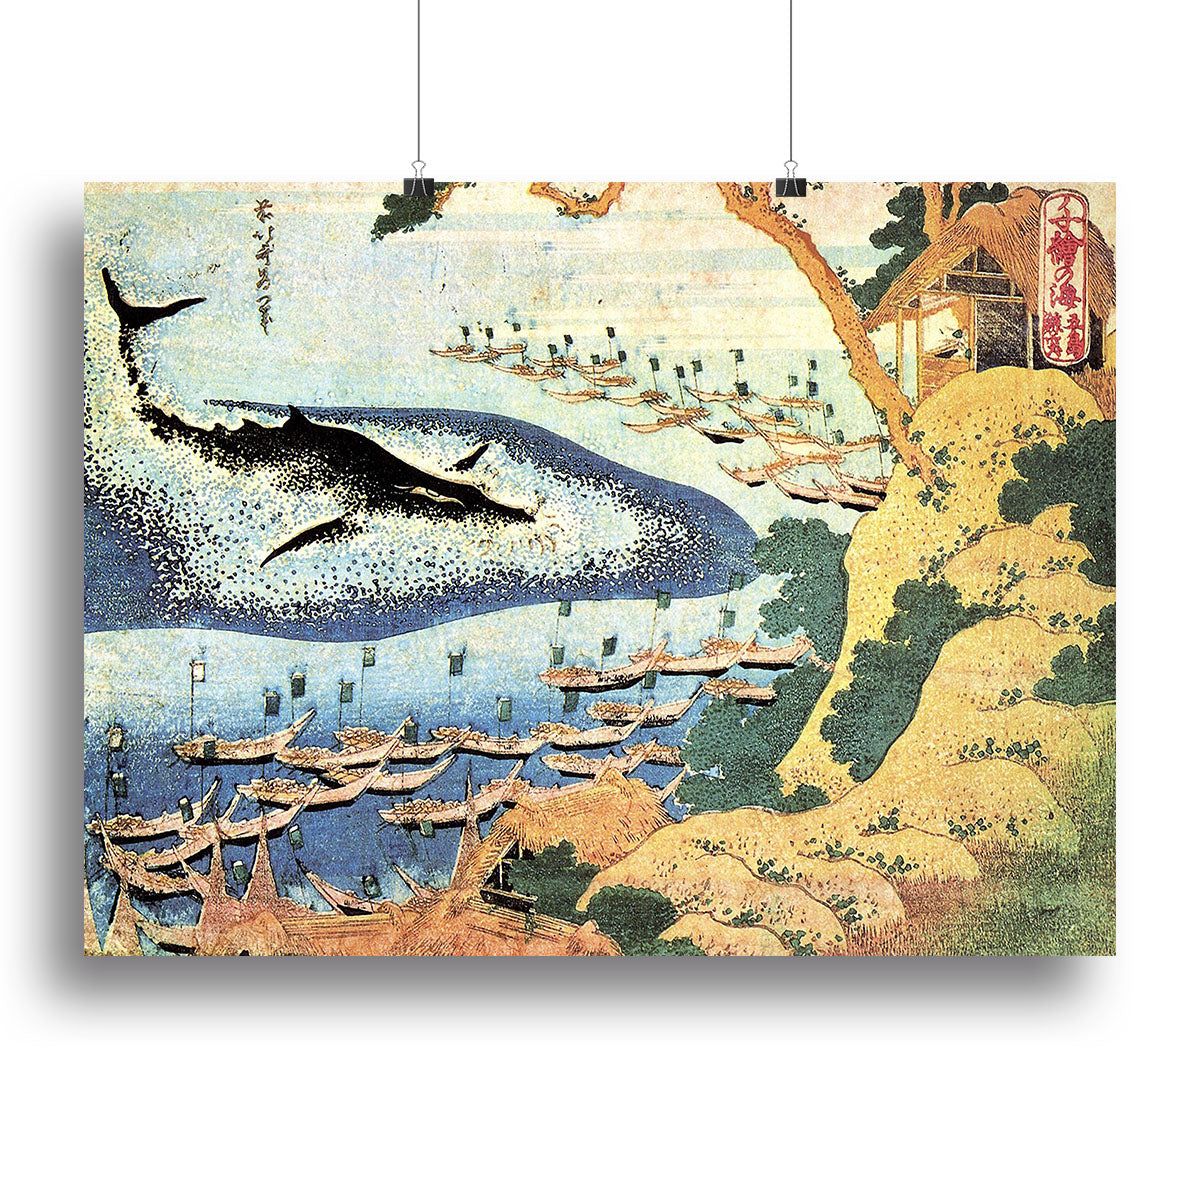 Ocean landscape and whale by Hokusai Canvas Print or Poster - Canvas Art Rocks - 2